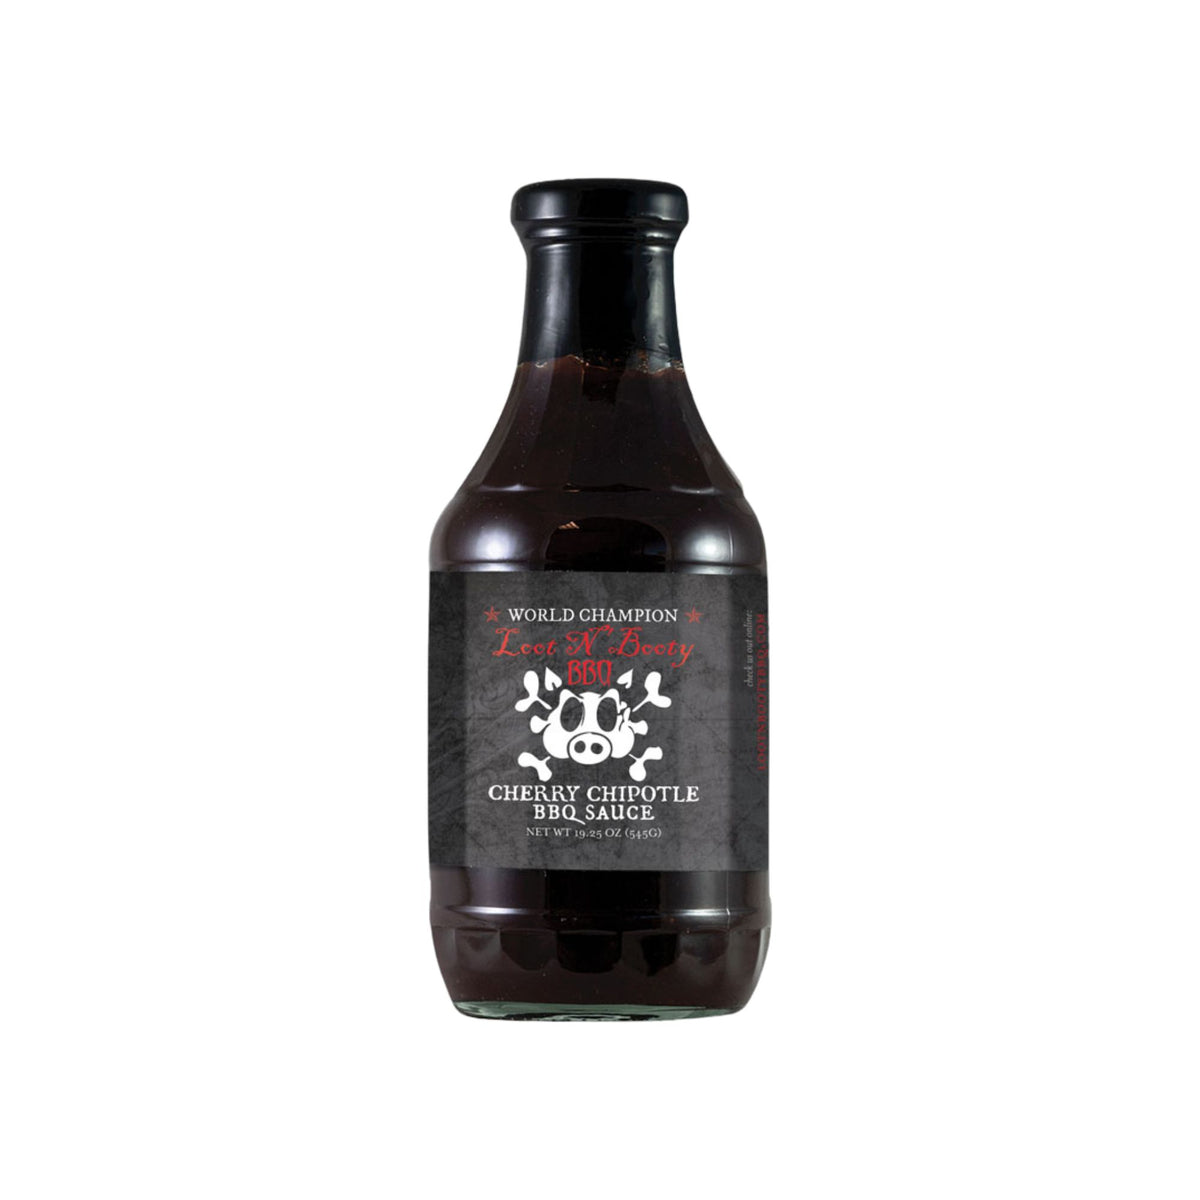 LOOT N’BOOTY BBQ | CHERRY CHIPOTLE BBQ SAUCE - Completamente naturale!